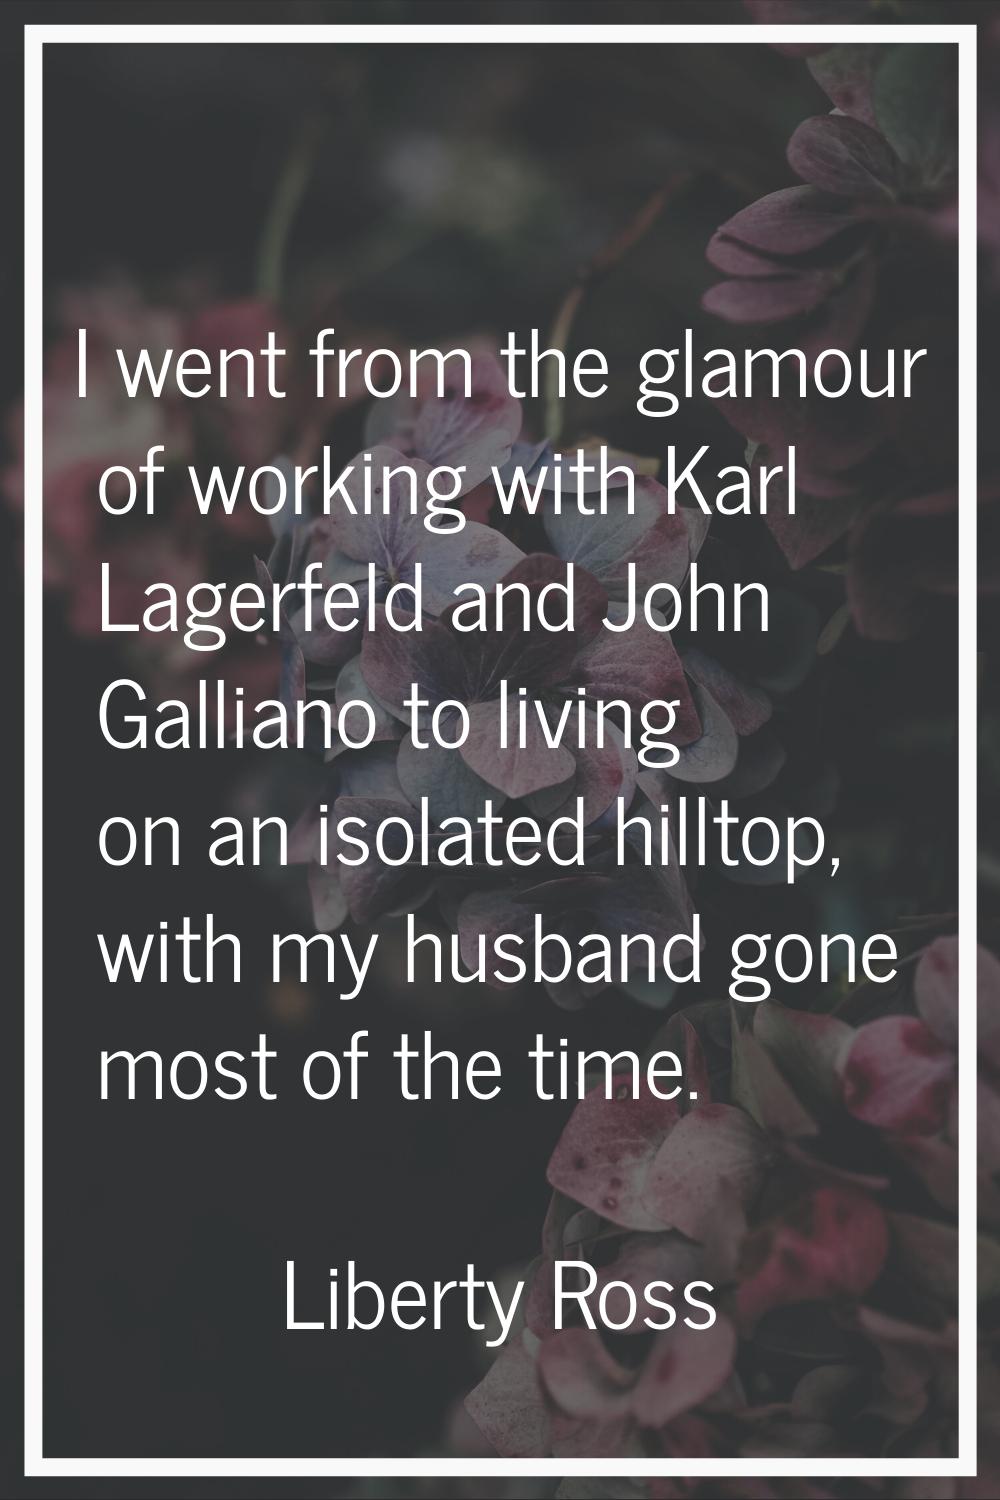 I went from the glamour of working with Karl Lagerfeld and John Galliano to living on an isolated h